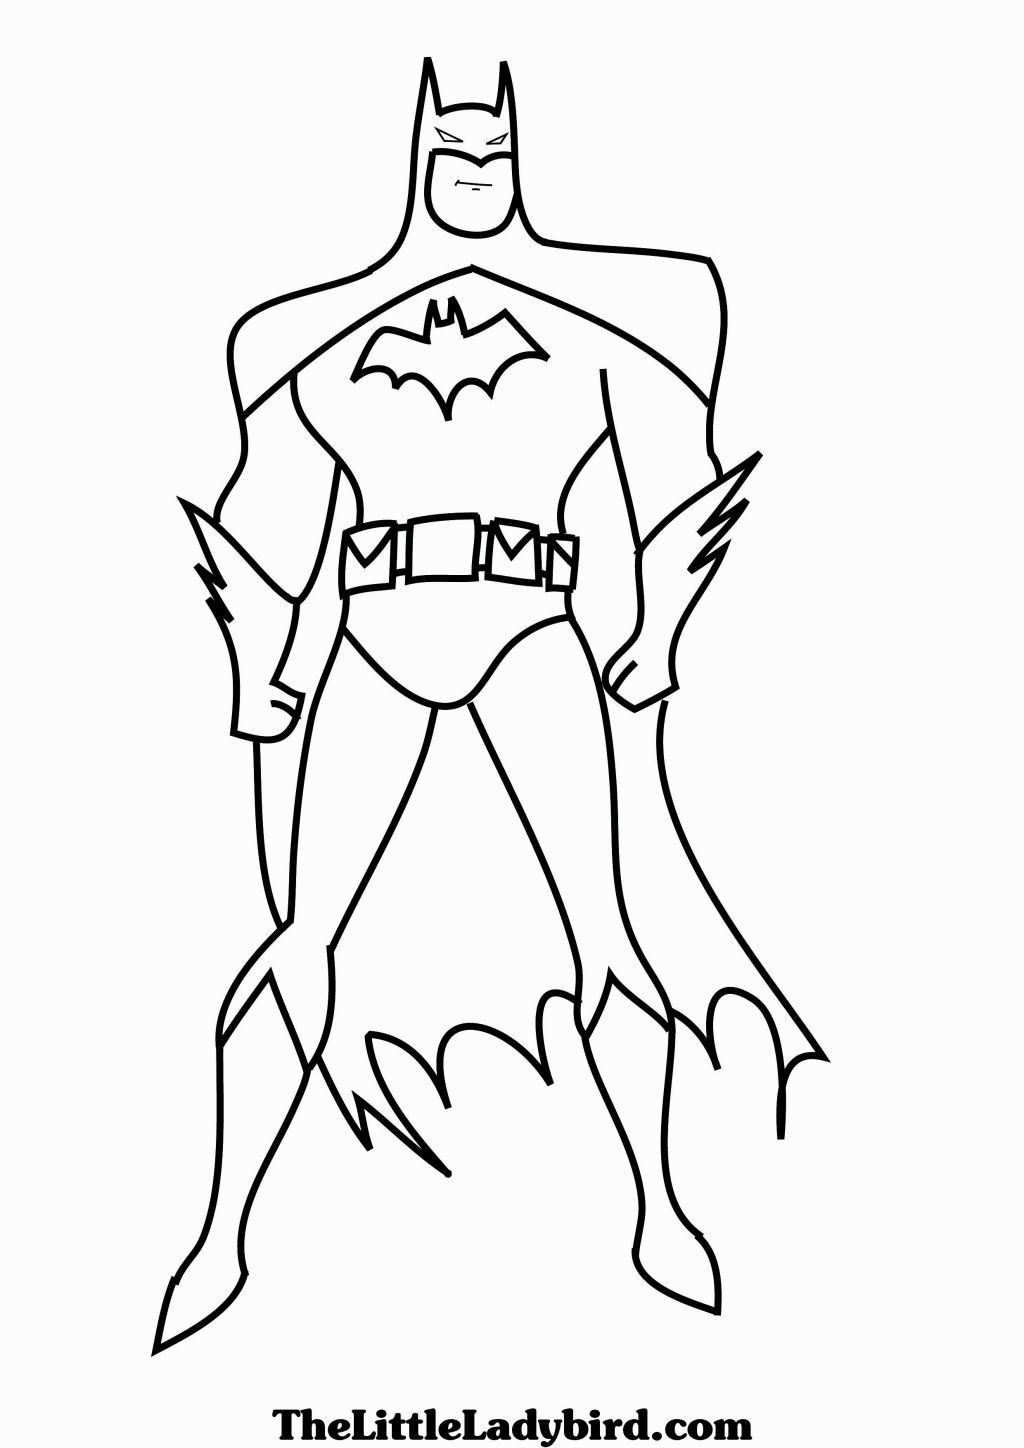 Batman Coloring Pages For Toddlers
 Coloring Pages Batman